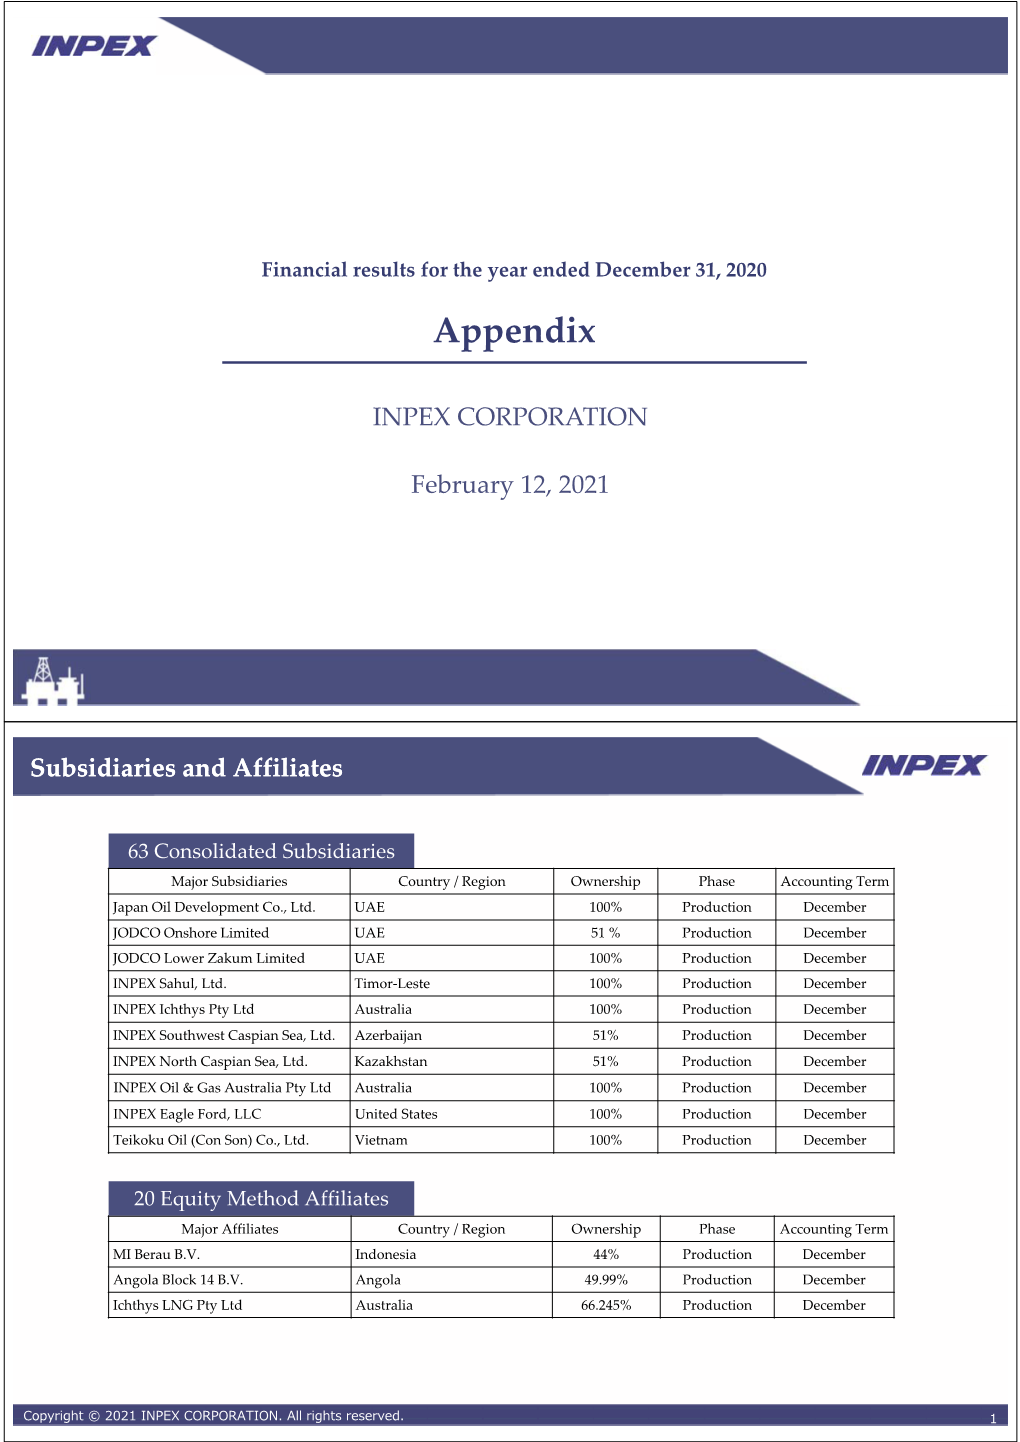 Financial Results for the Year Ended December 31, 2020 Appendix